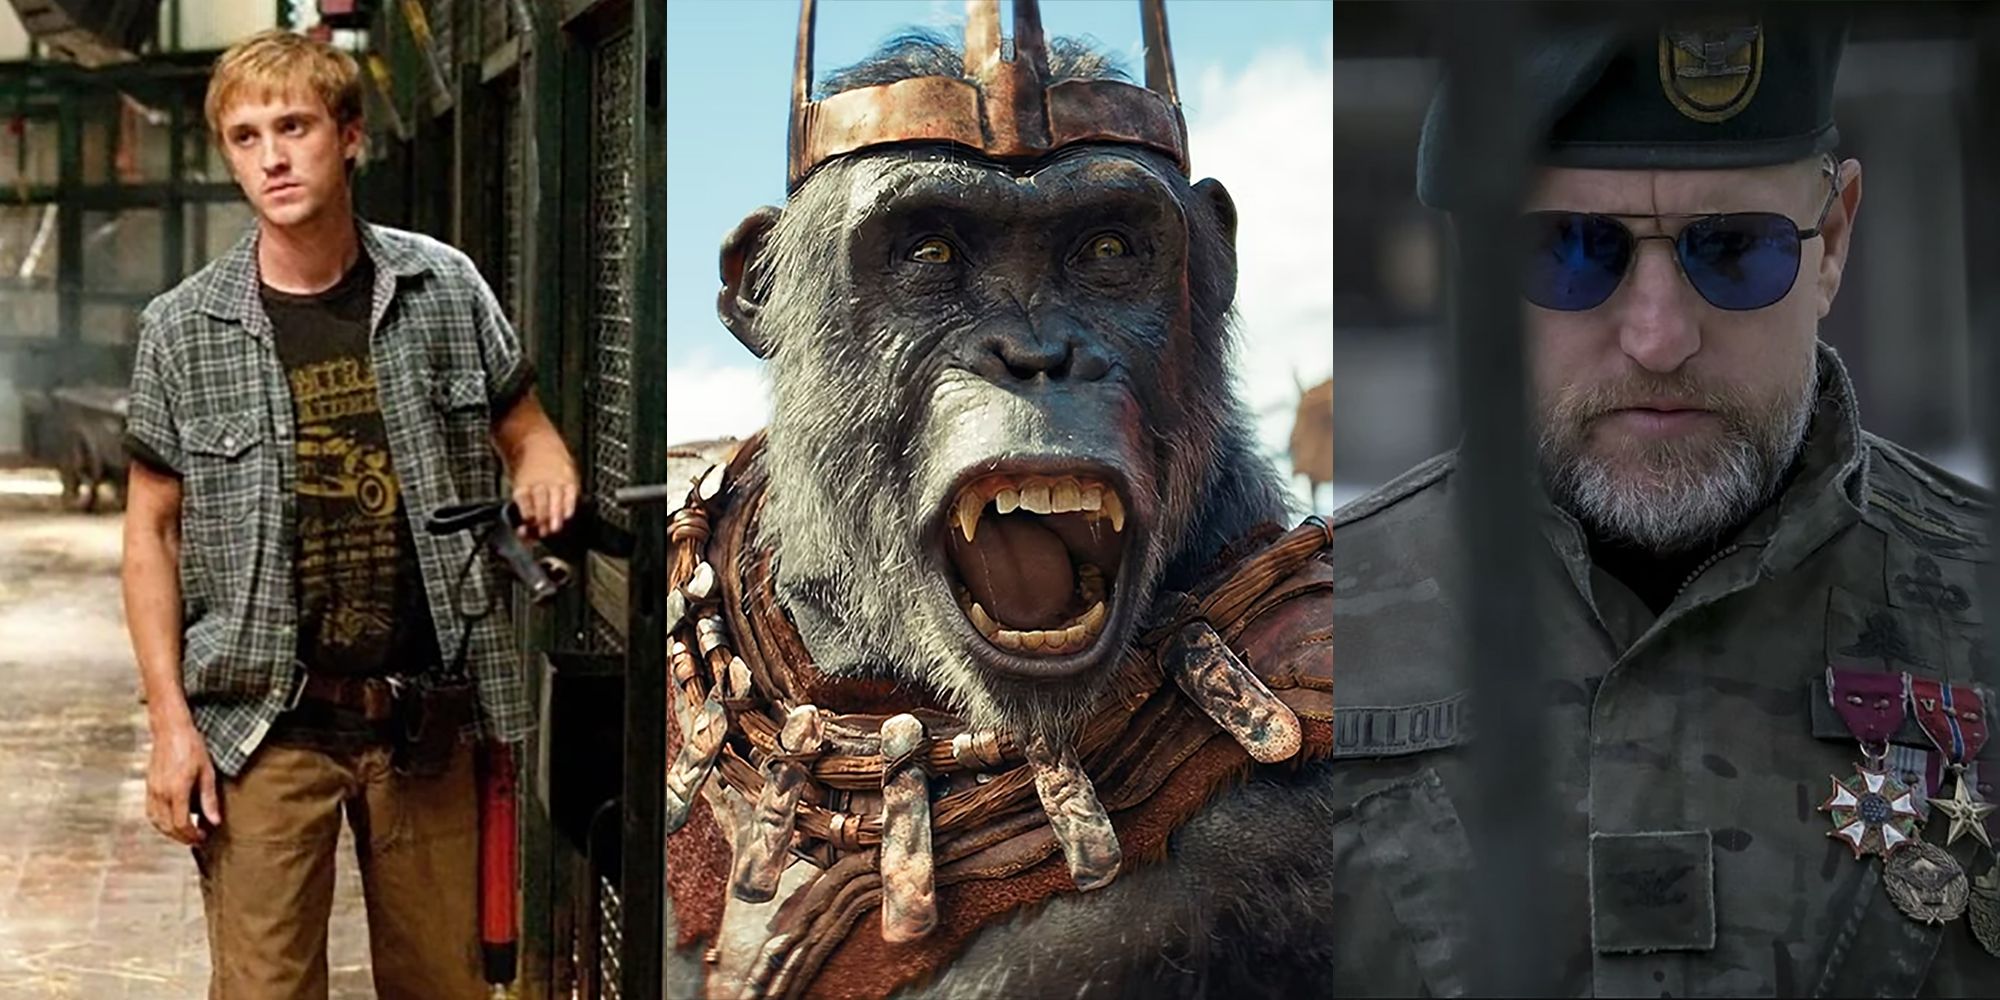 Best Planet Of The Apes Villains